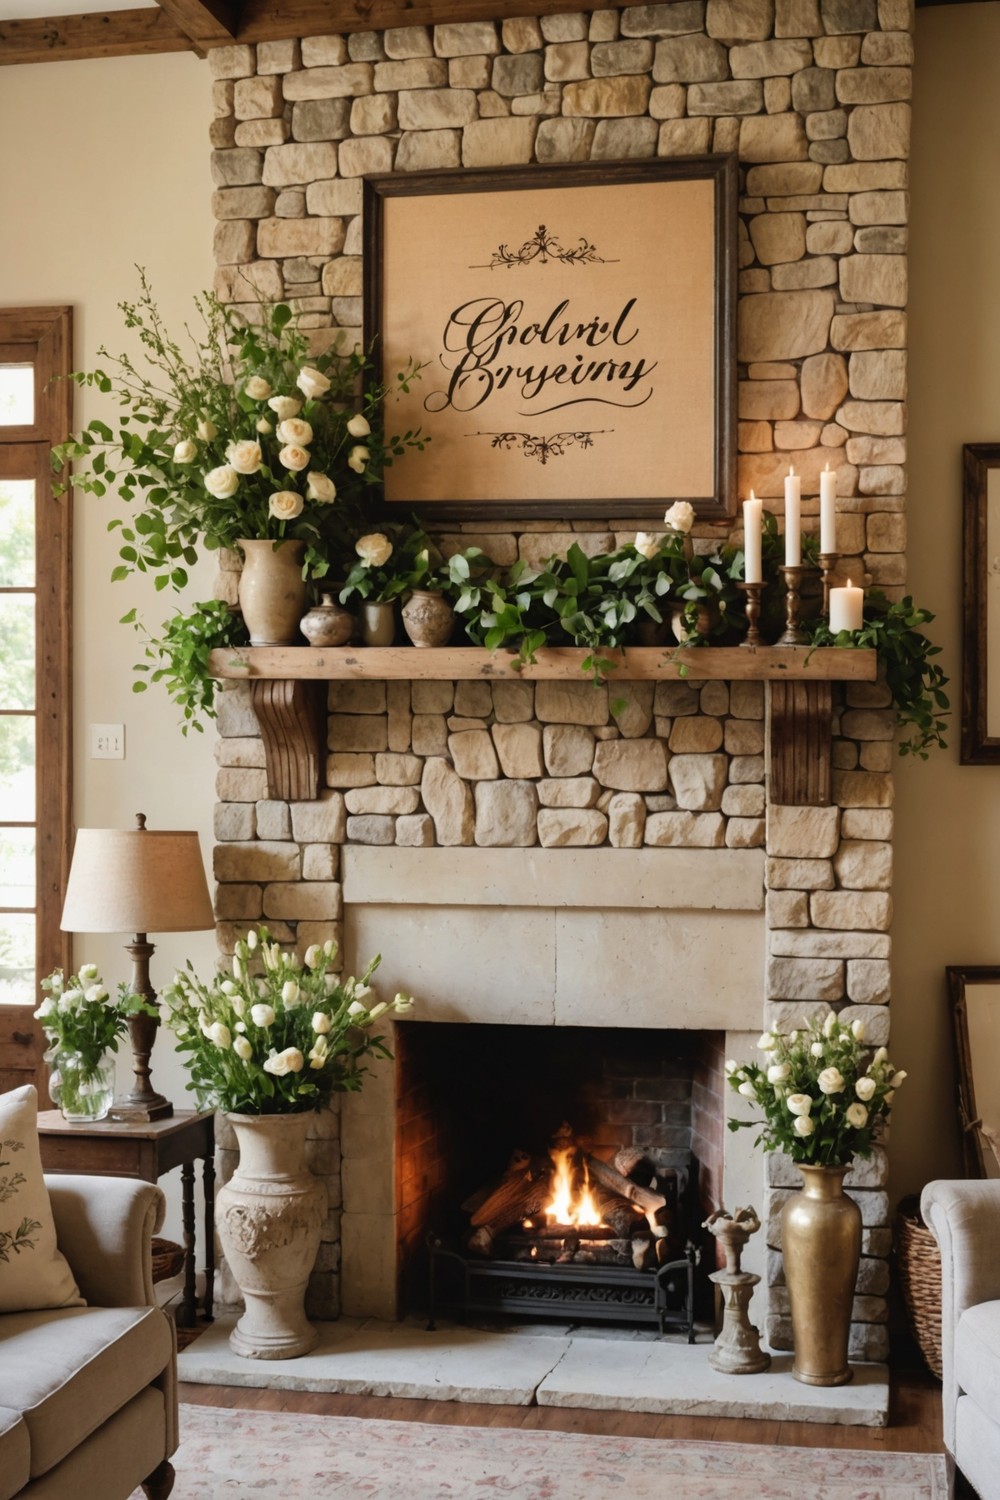 Rustic Wooden Signs and Wall Decor